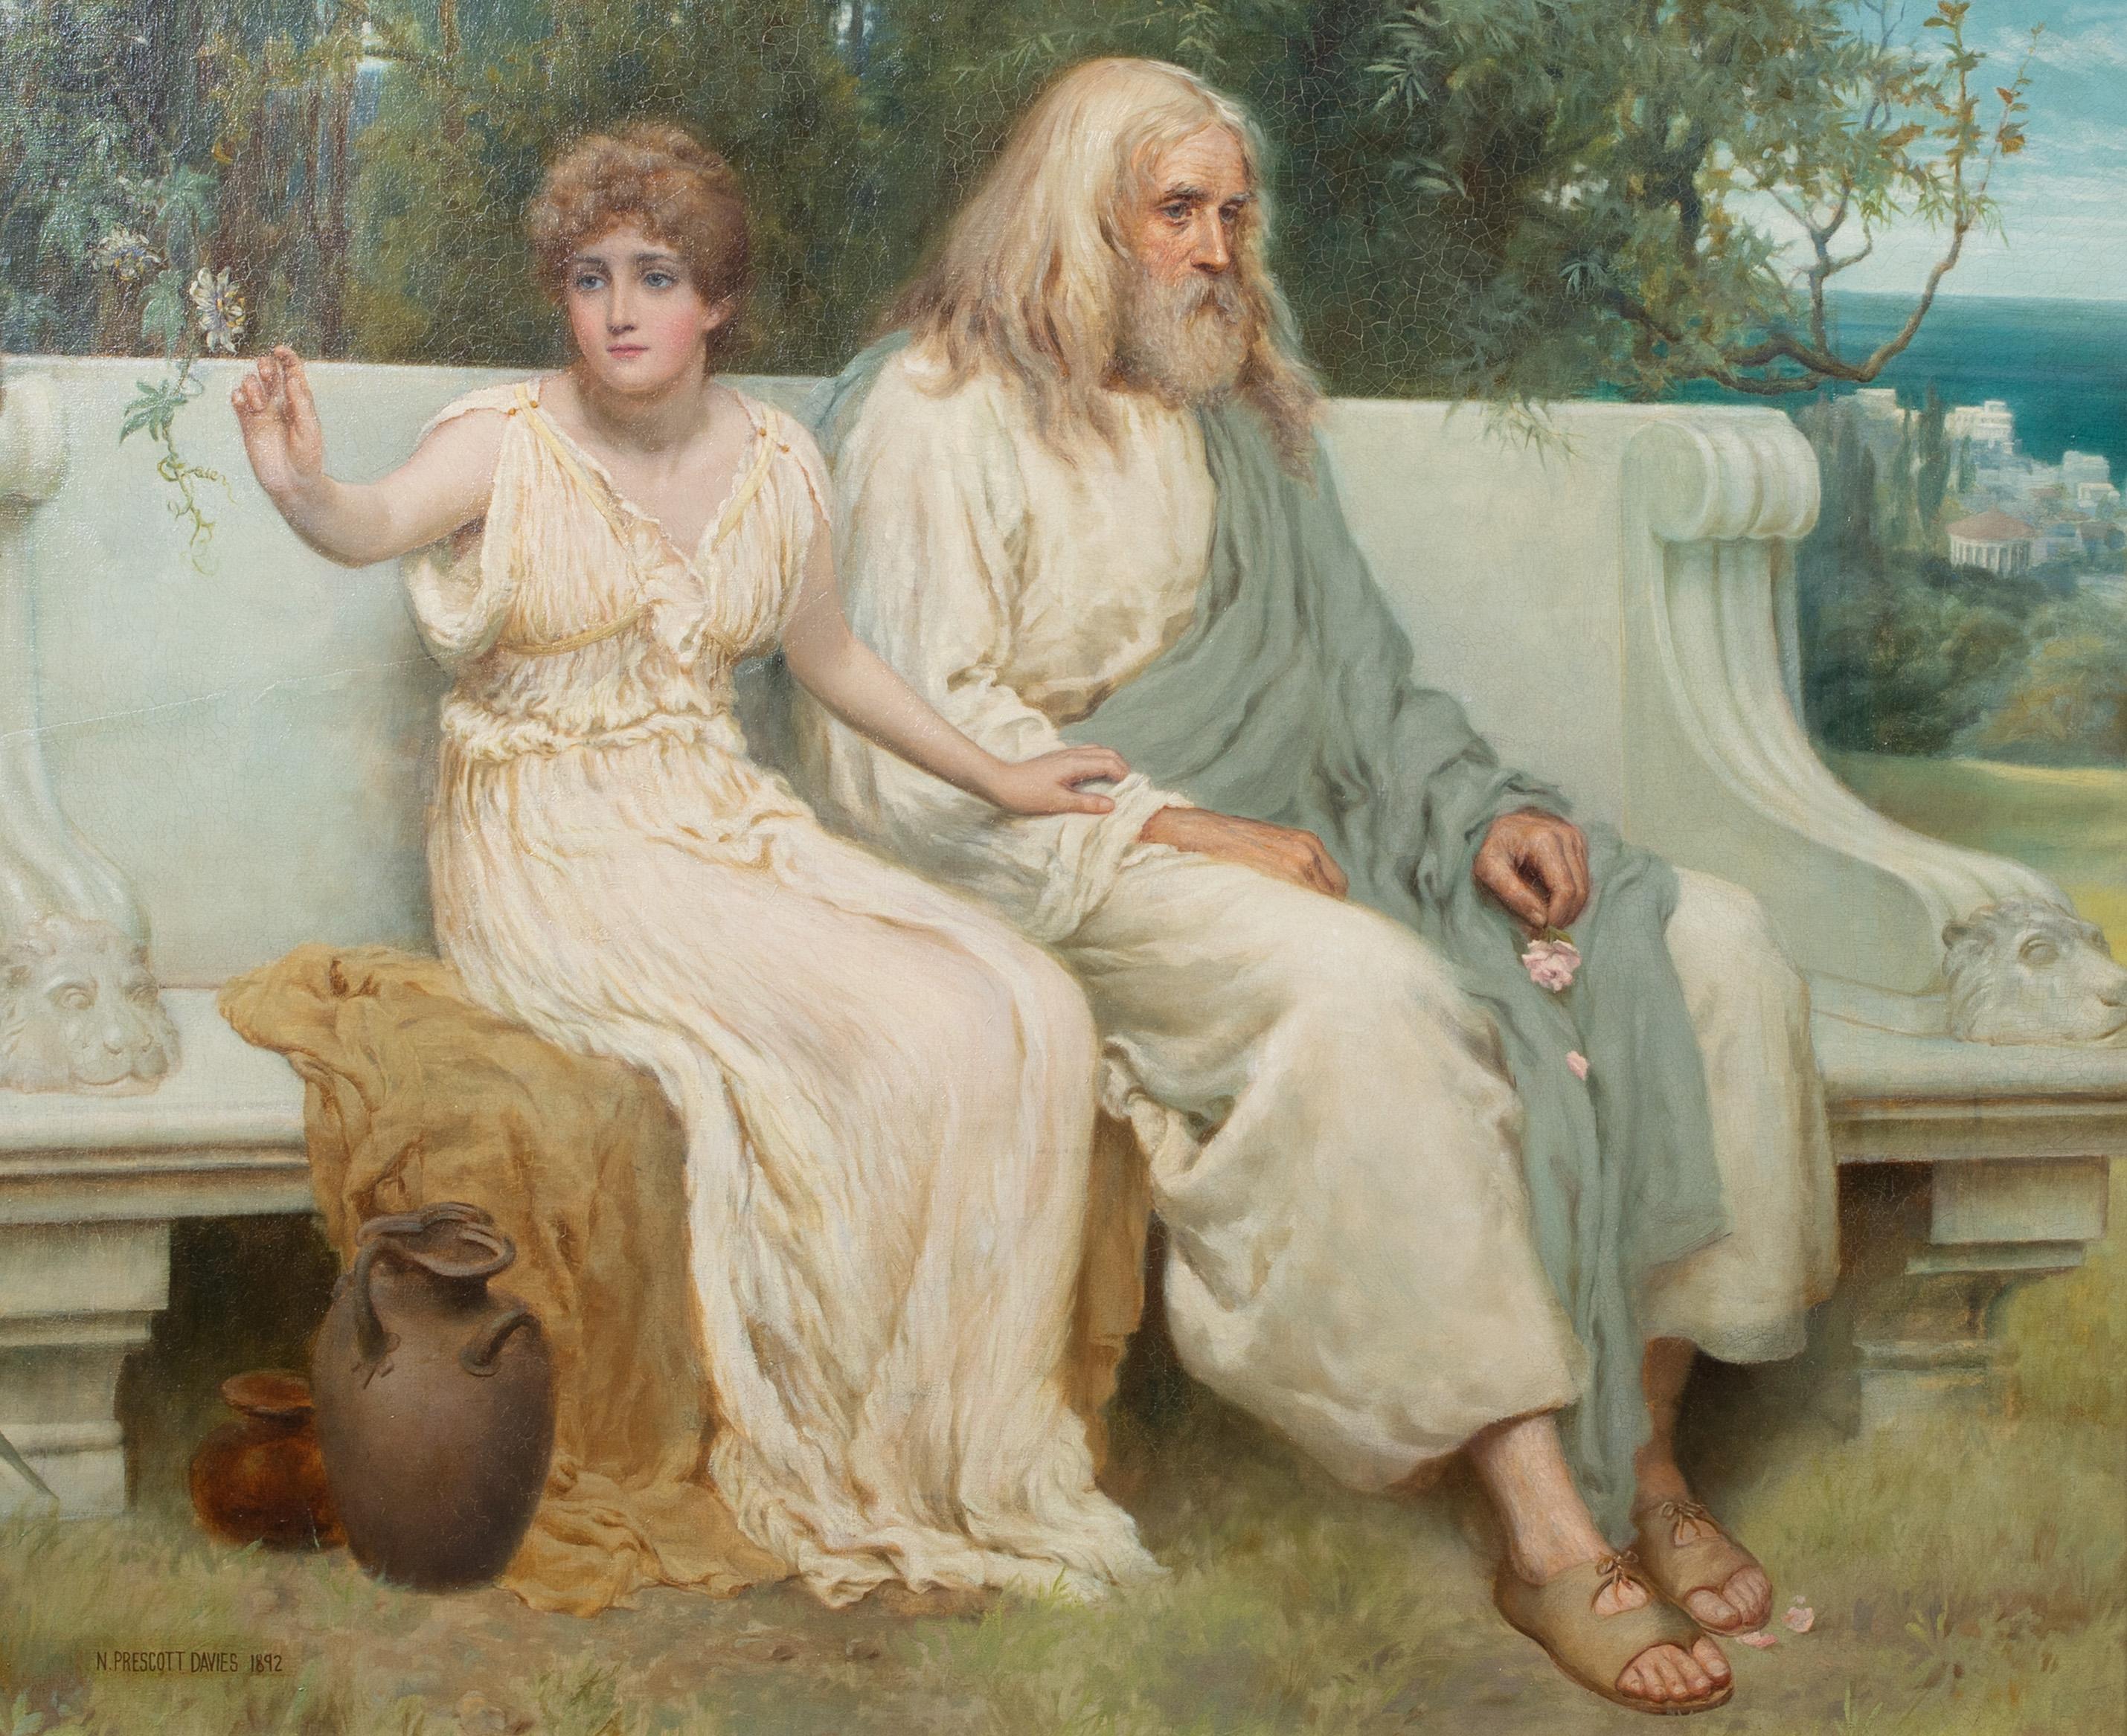 Youth & Old Age, 19th Century - Painting by Norman Prescott Davies